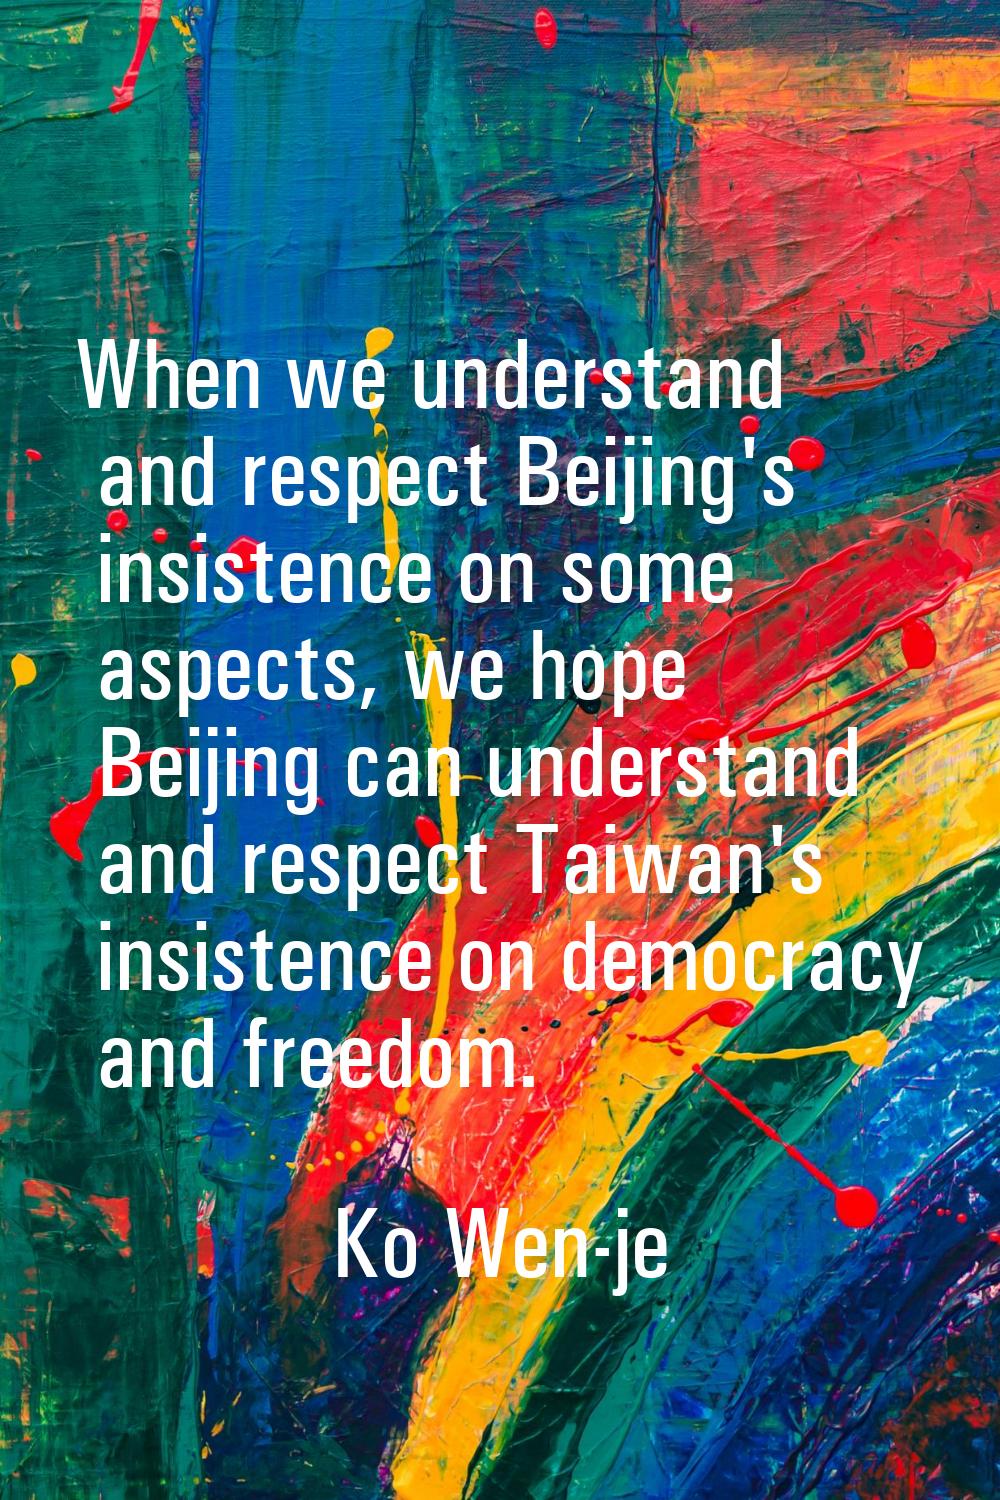 When we understand and respect Beijing's insistence on some aspects, we hope Beijing can understand